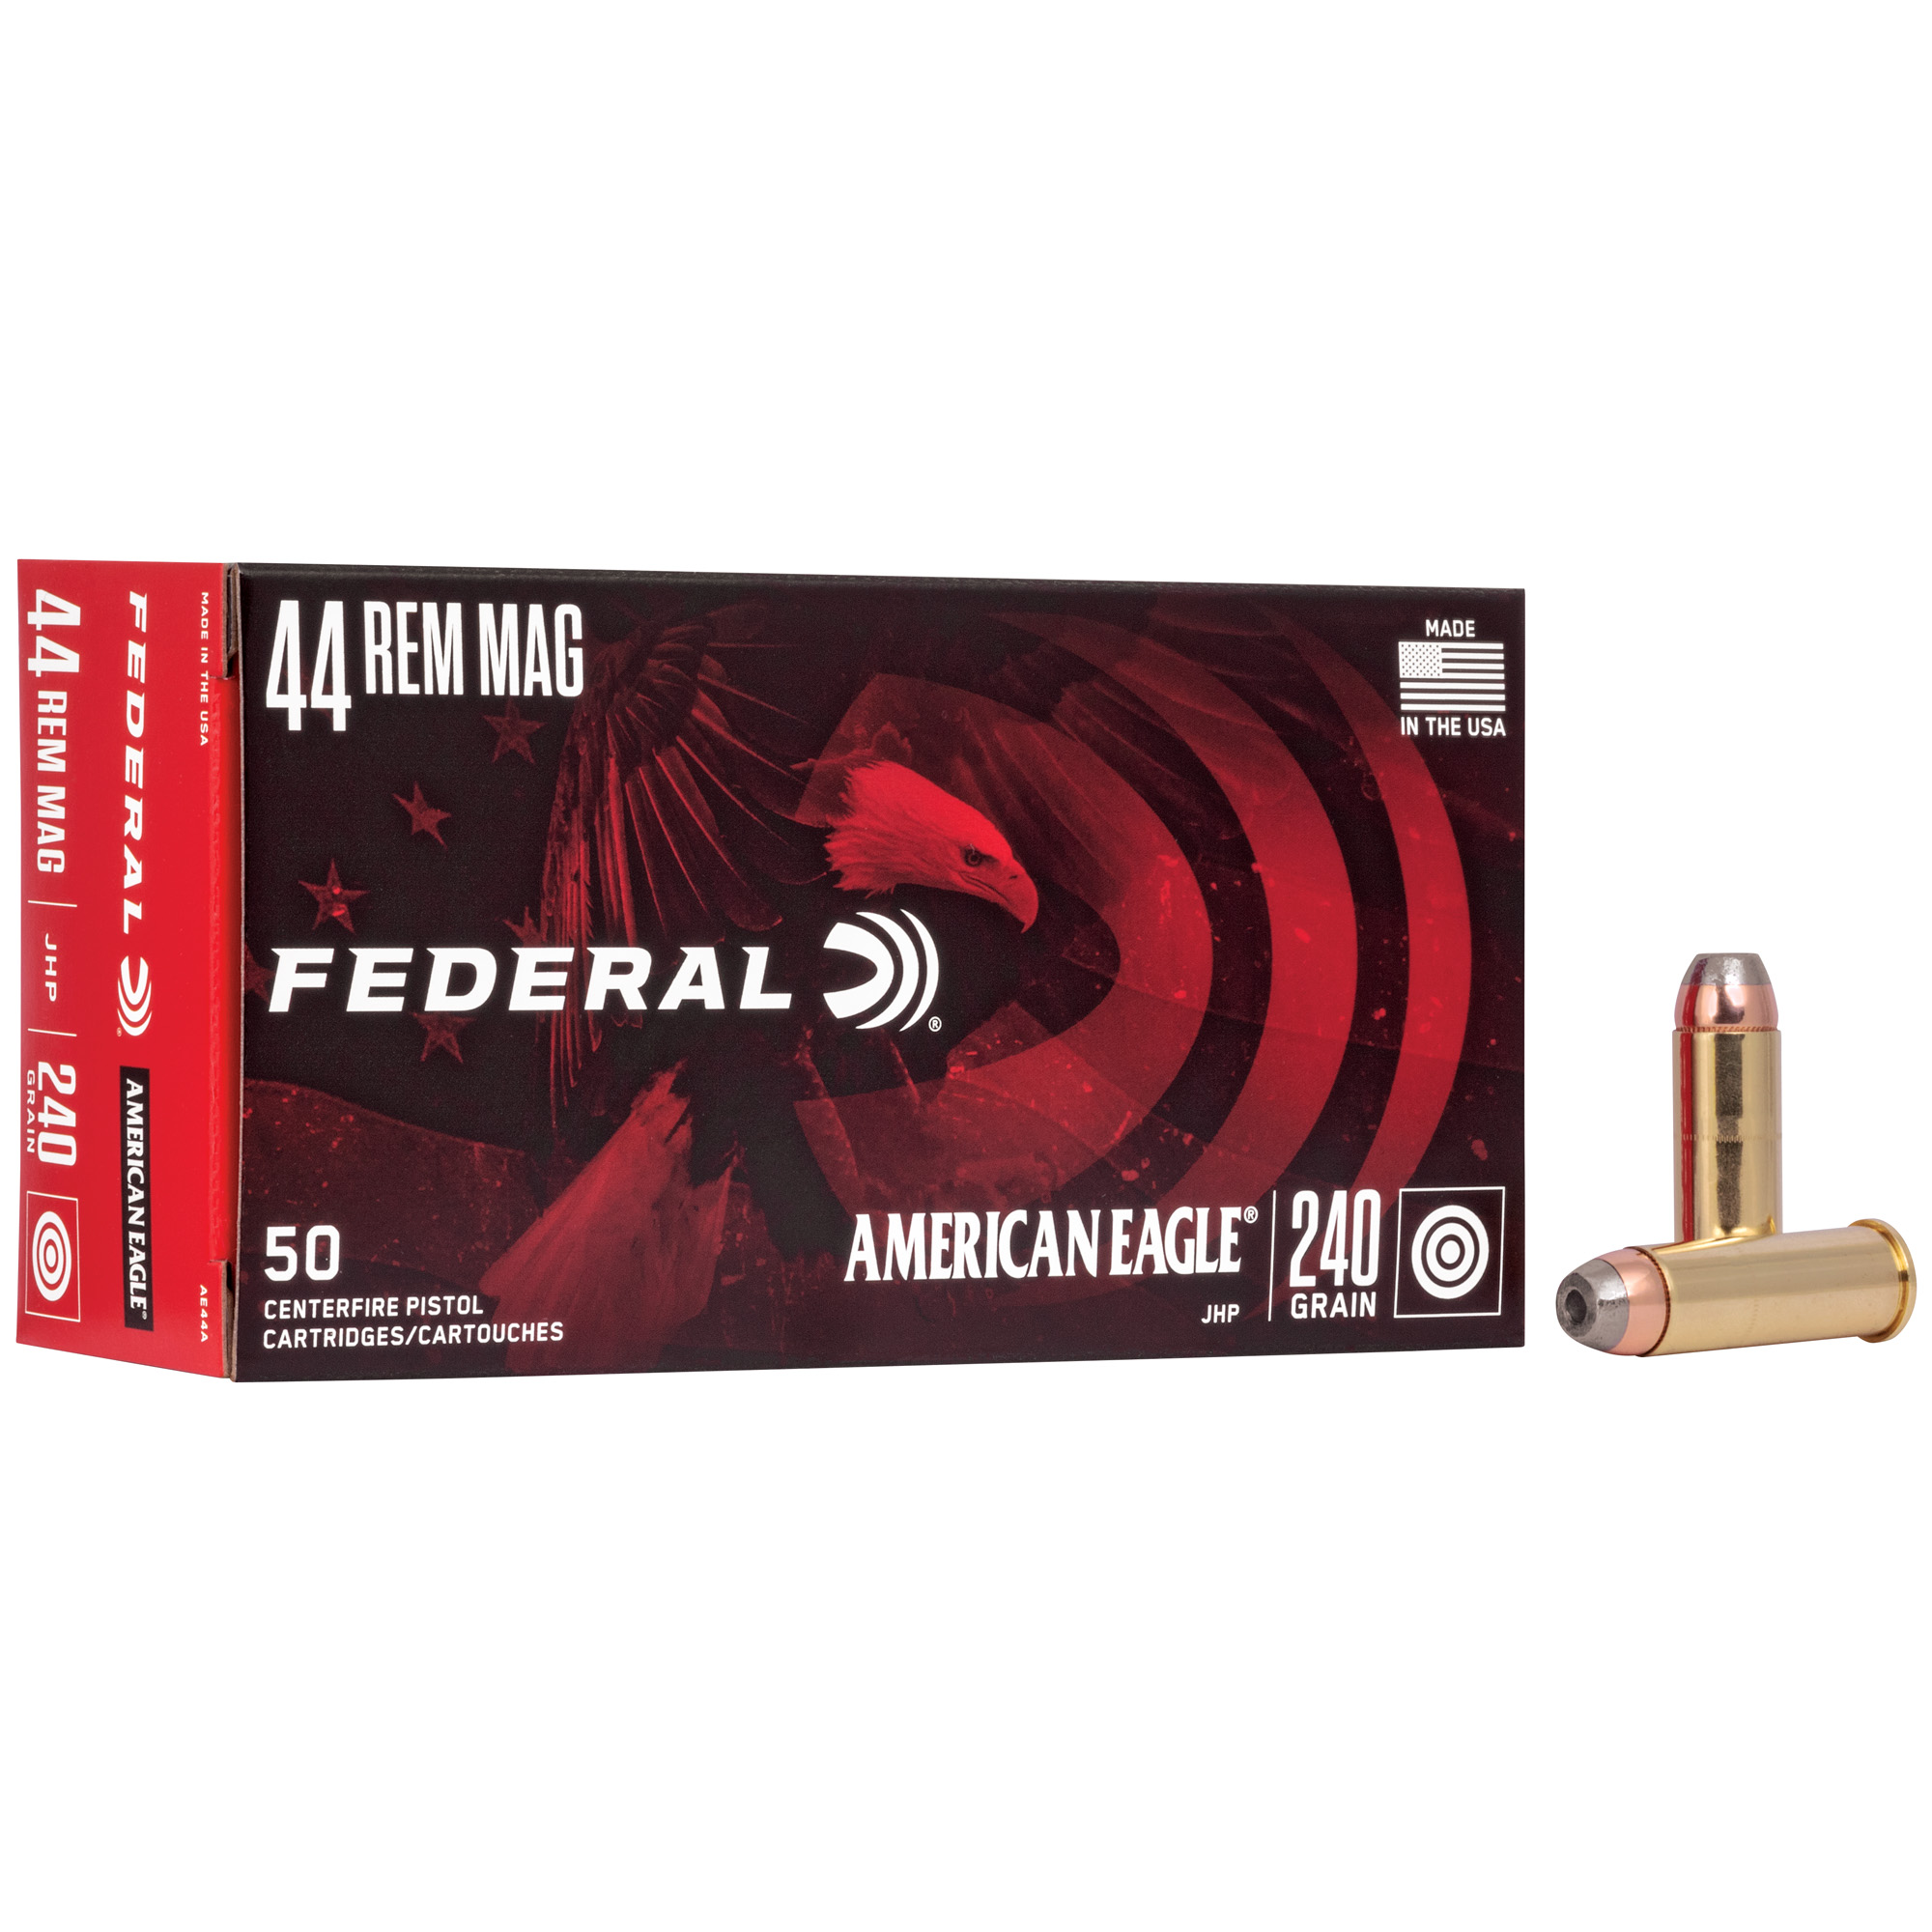 Federal, American Eagle, 44MAG, 240 Grain, Jacketed Hollow Point, 50 Round Box